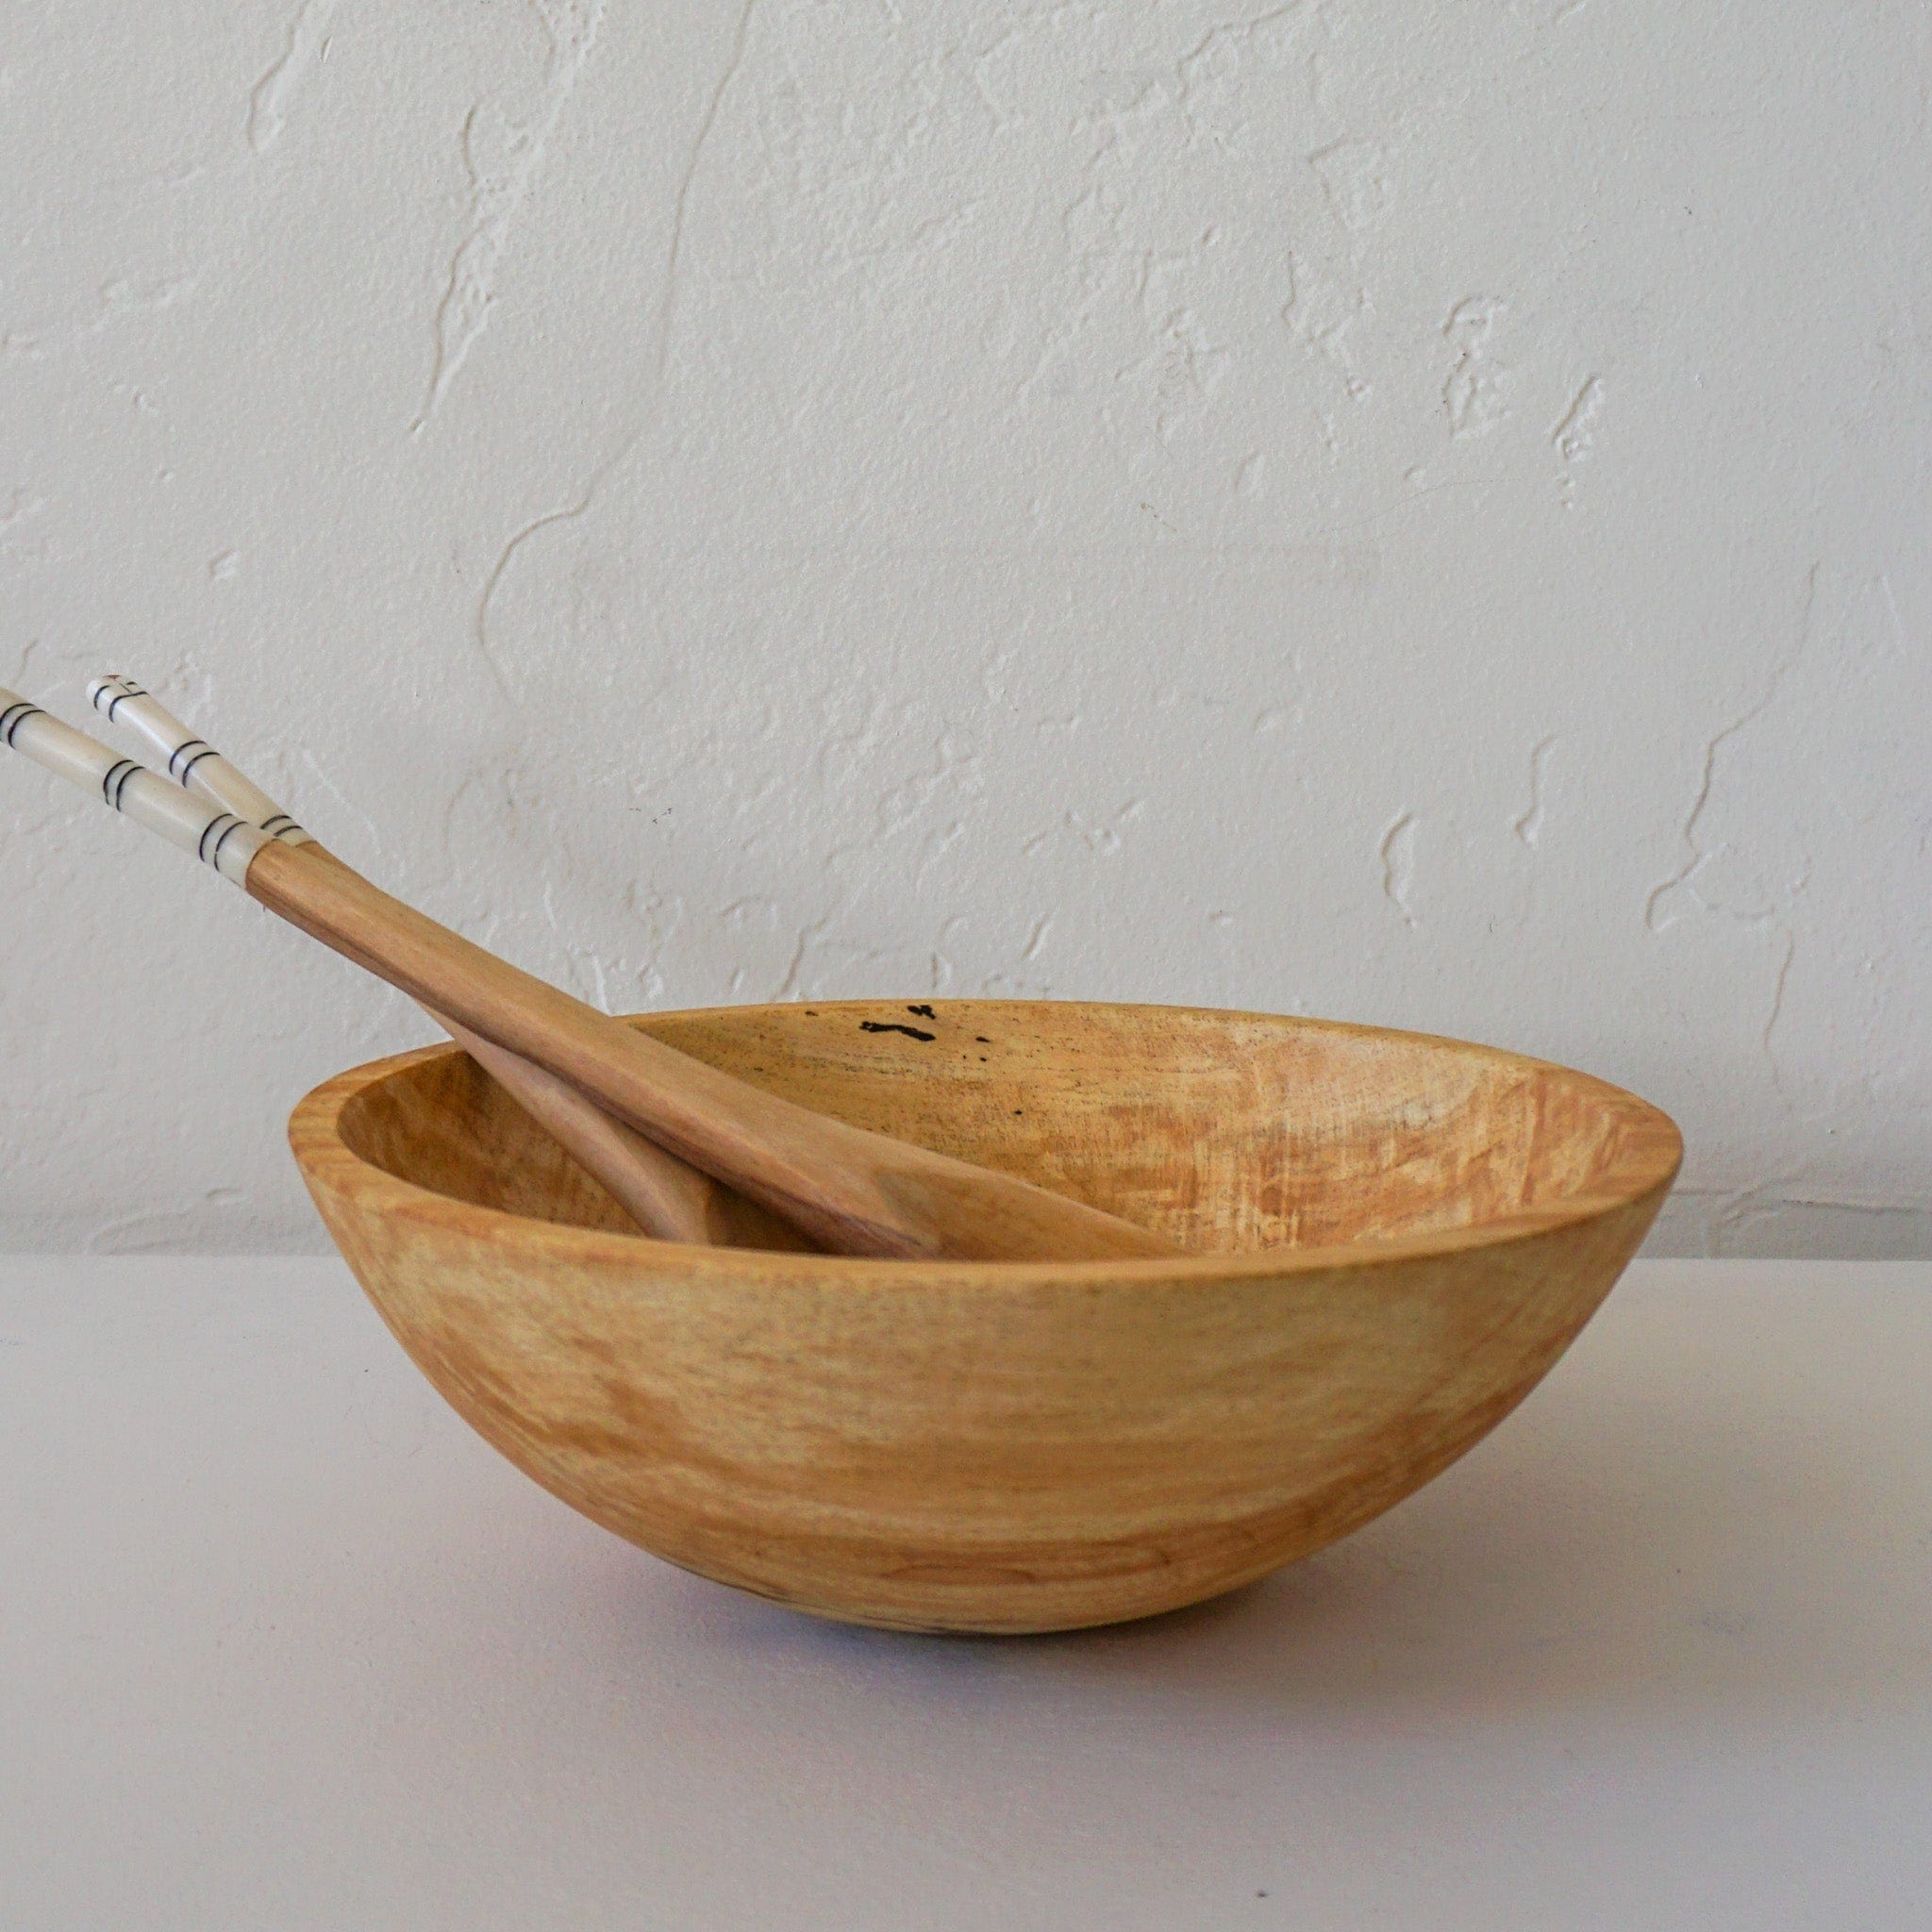 Spencer Peterman Kitchen & Dining Spalted Maple Round Salad Bowl - 10"